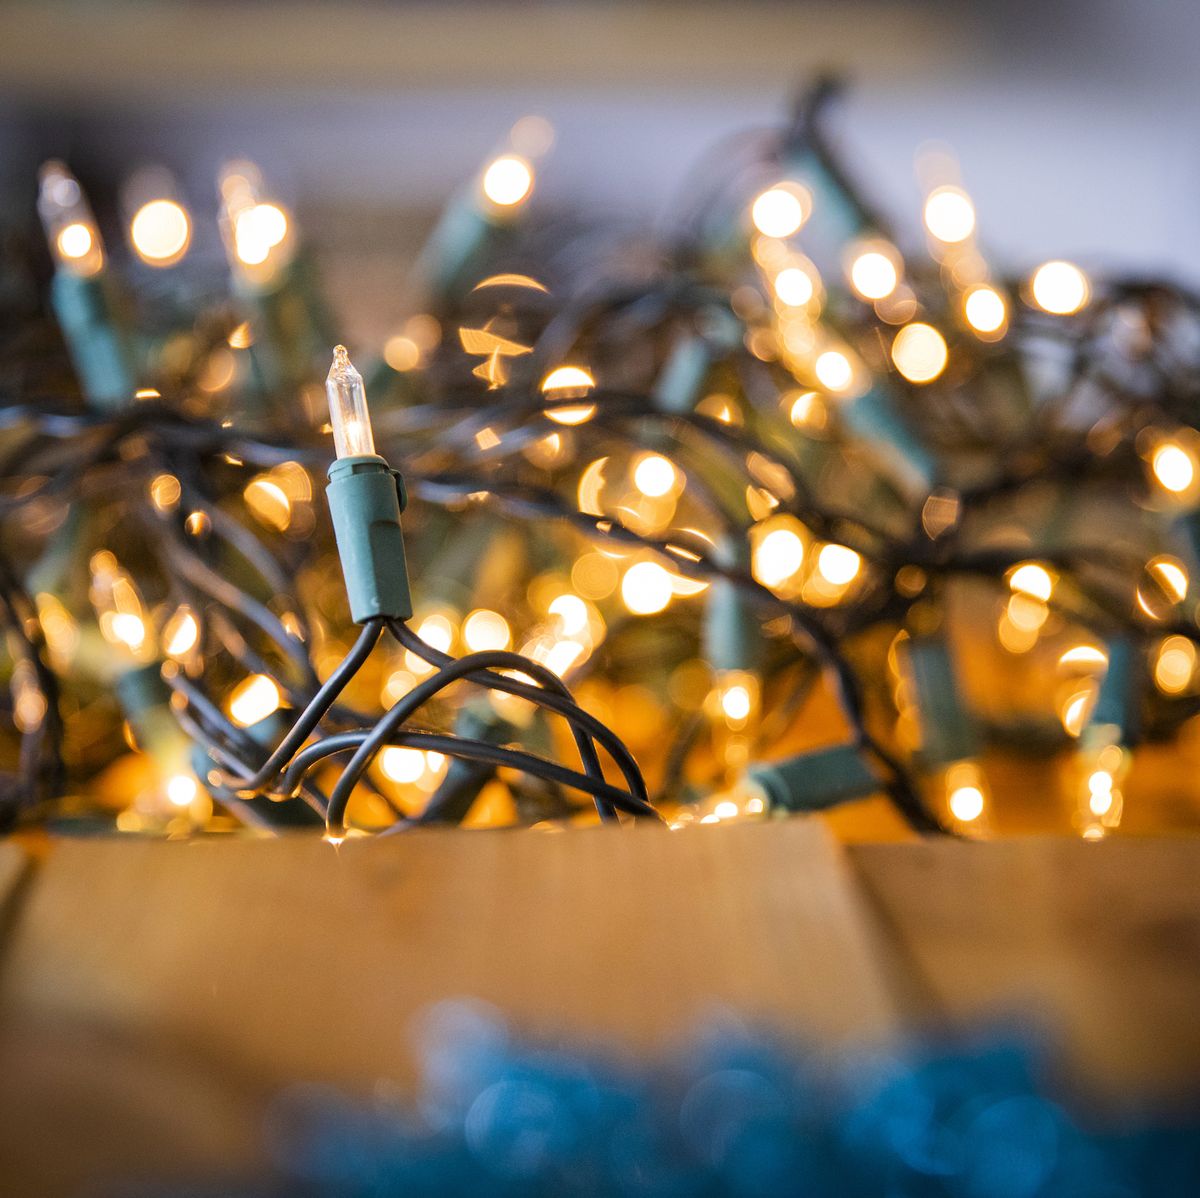 How to Hang Christmas Lights - 6 Steps to Doing it Right